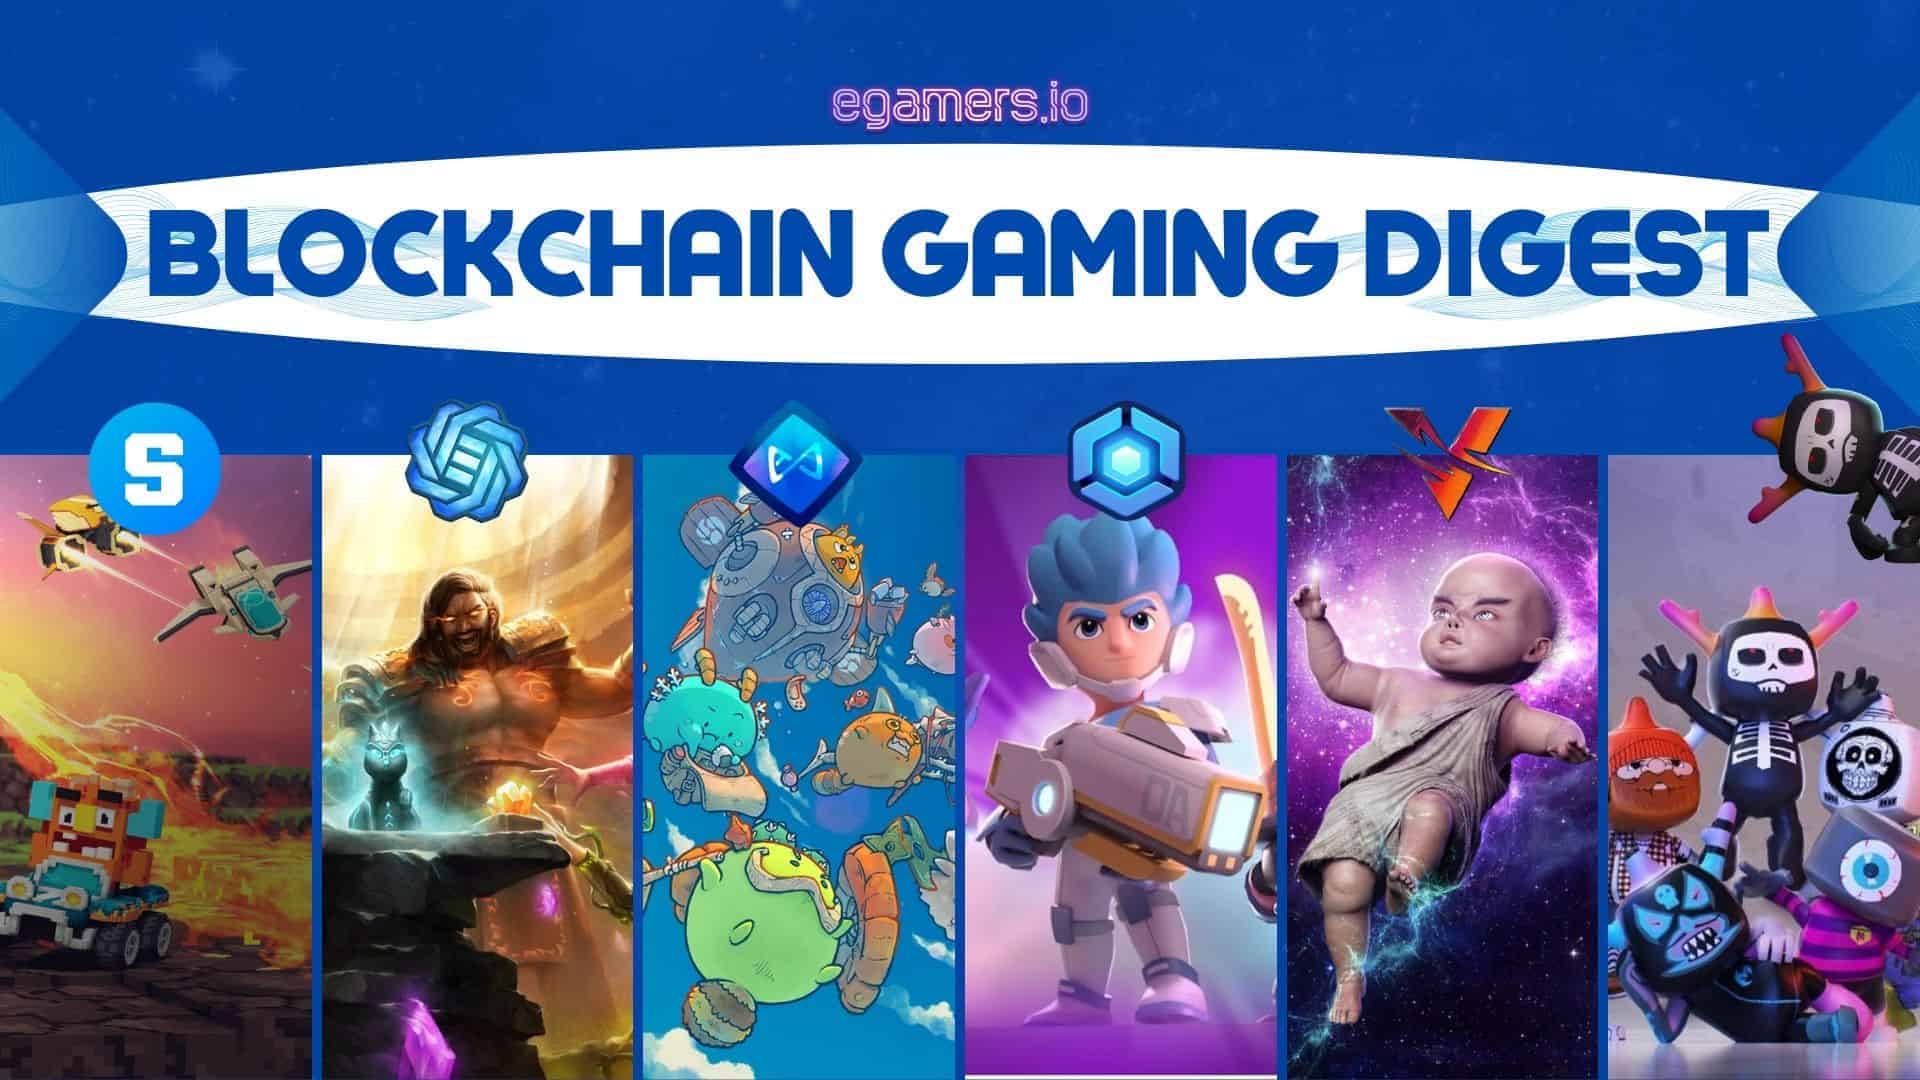 BLOCKCHAIN GAMING DIGEST new In the Galaverse event that took place this week, Gala games announced the launch of a 0 Million fund together with C2 Ventures in order to invest in game developers and Web3 games and other projects.